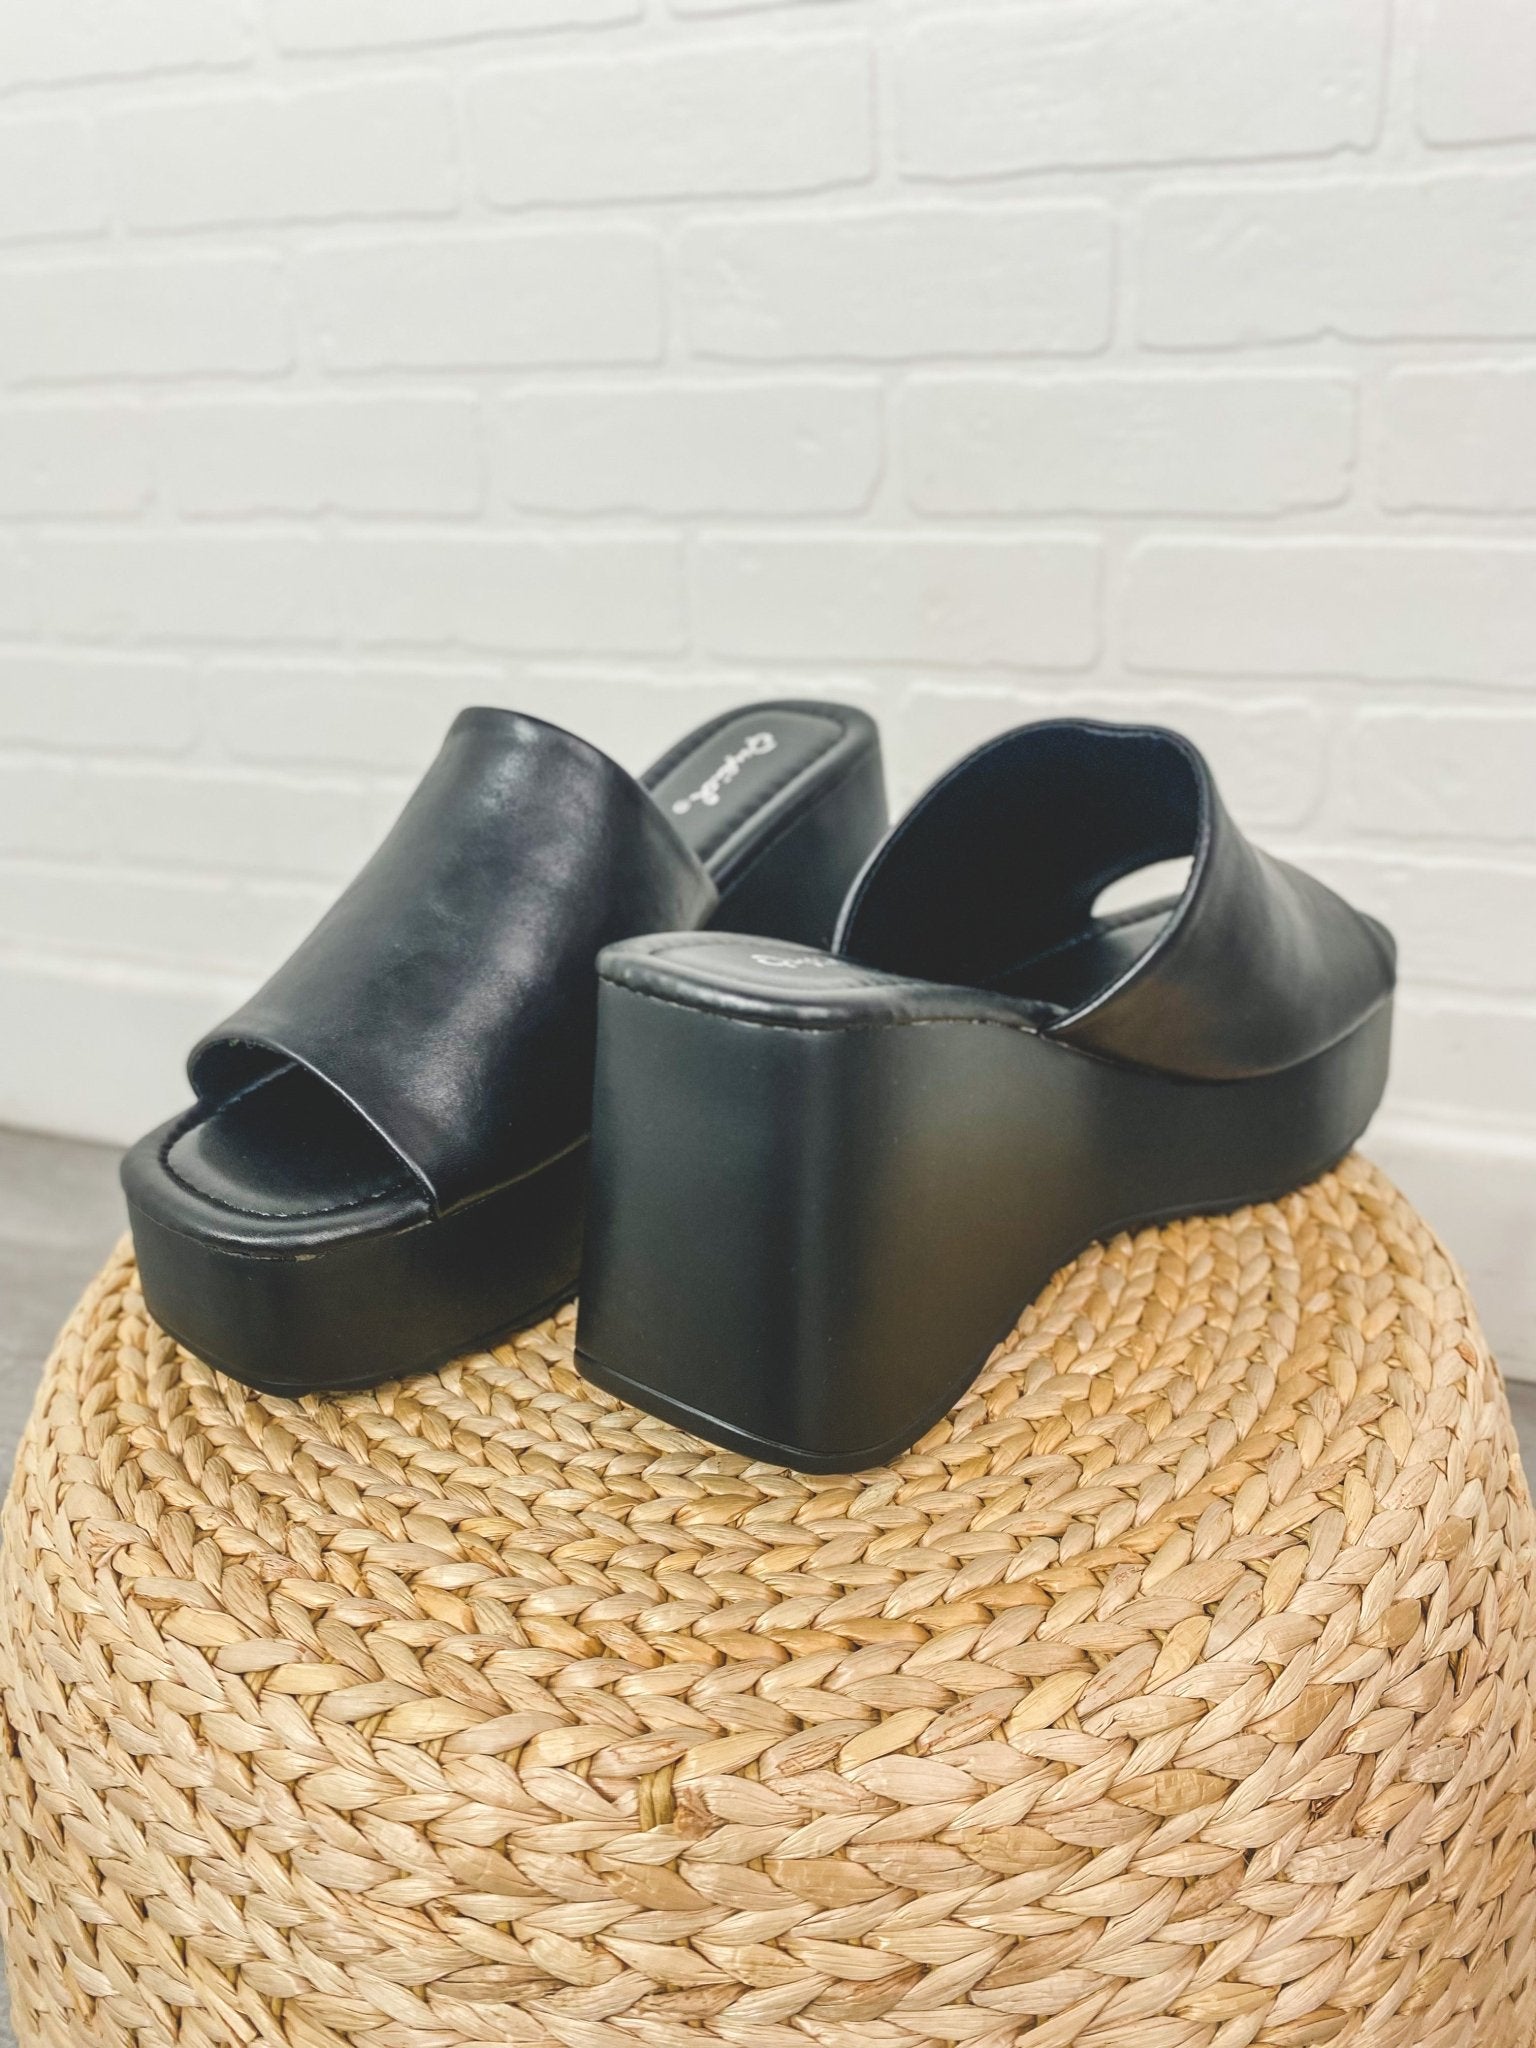 Afton one band sandal black - Trendy Shoes - Fashion Shoes at Lush Fashion Lounge Boutique in Oklahoma City